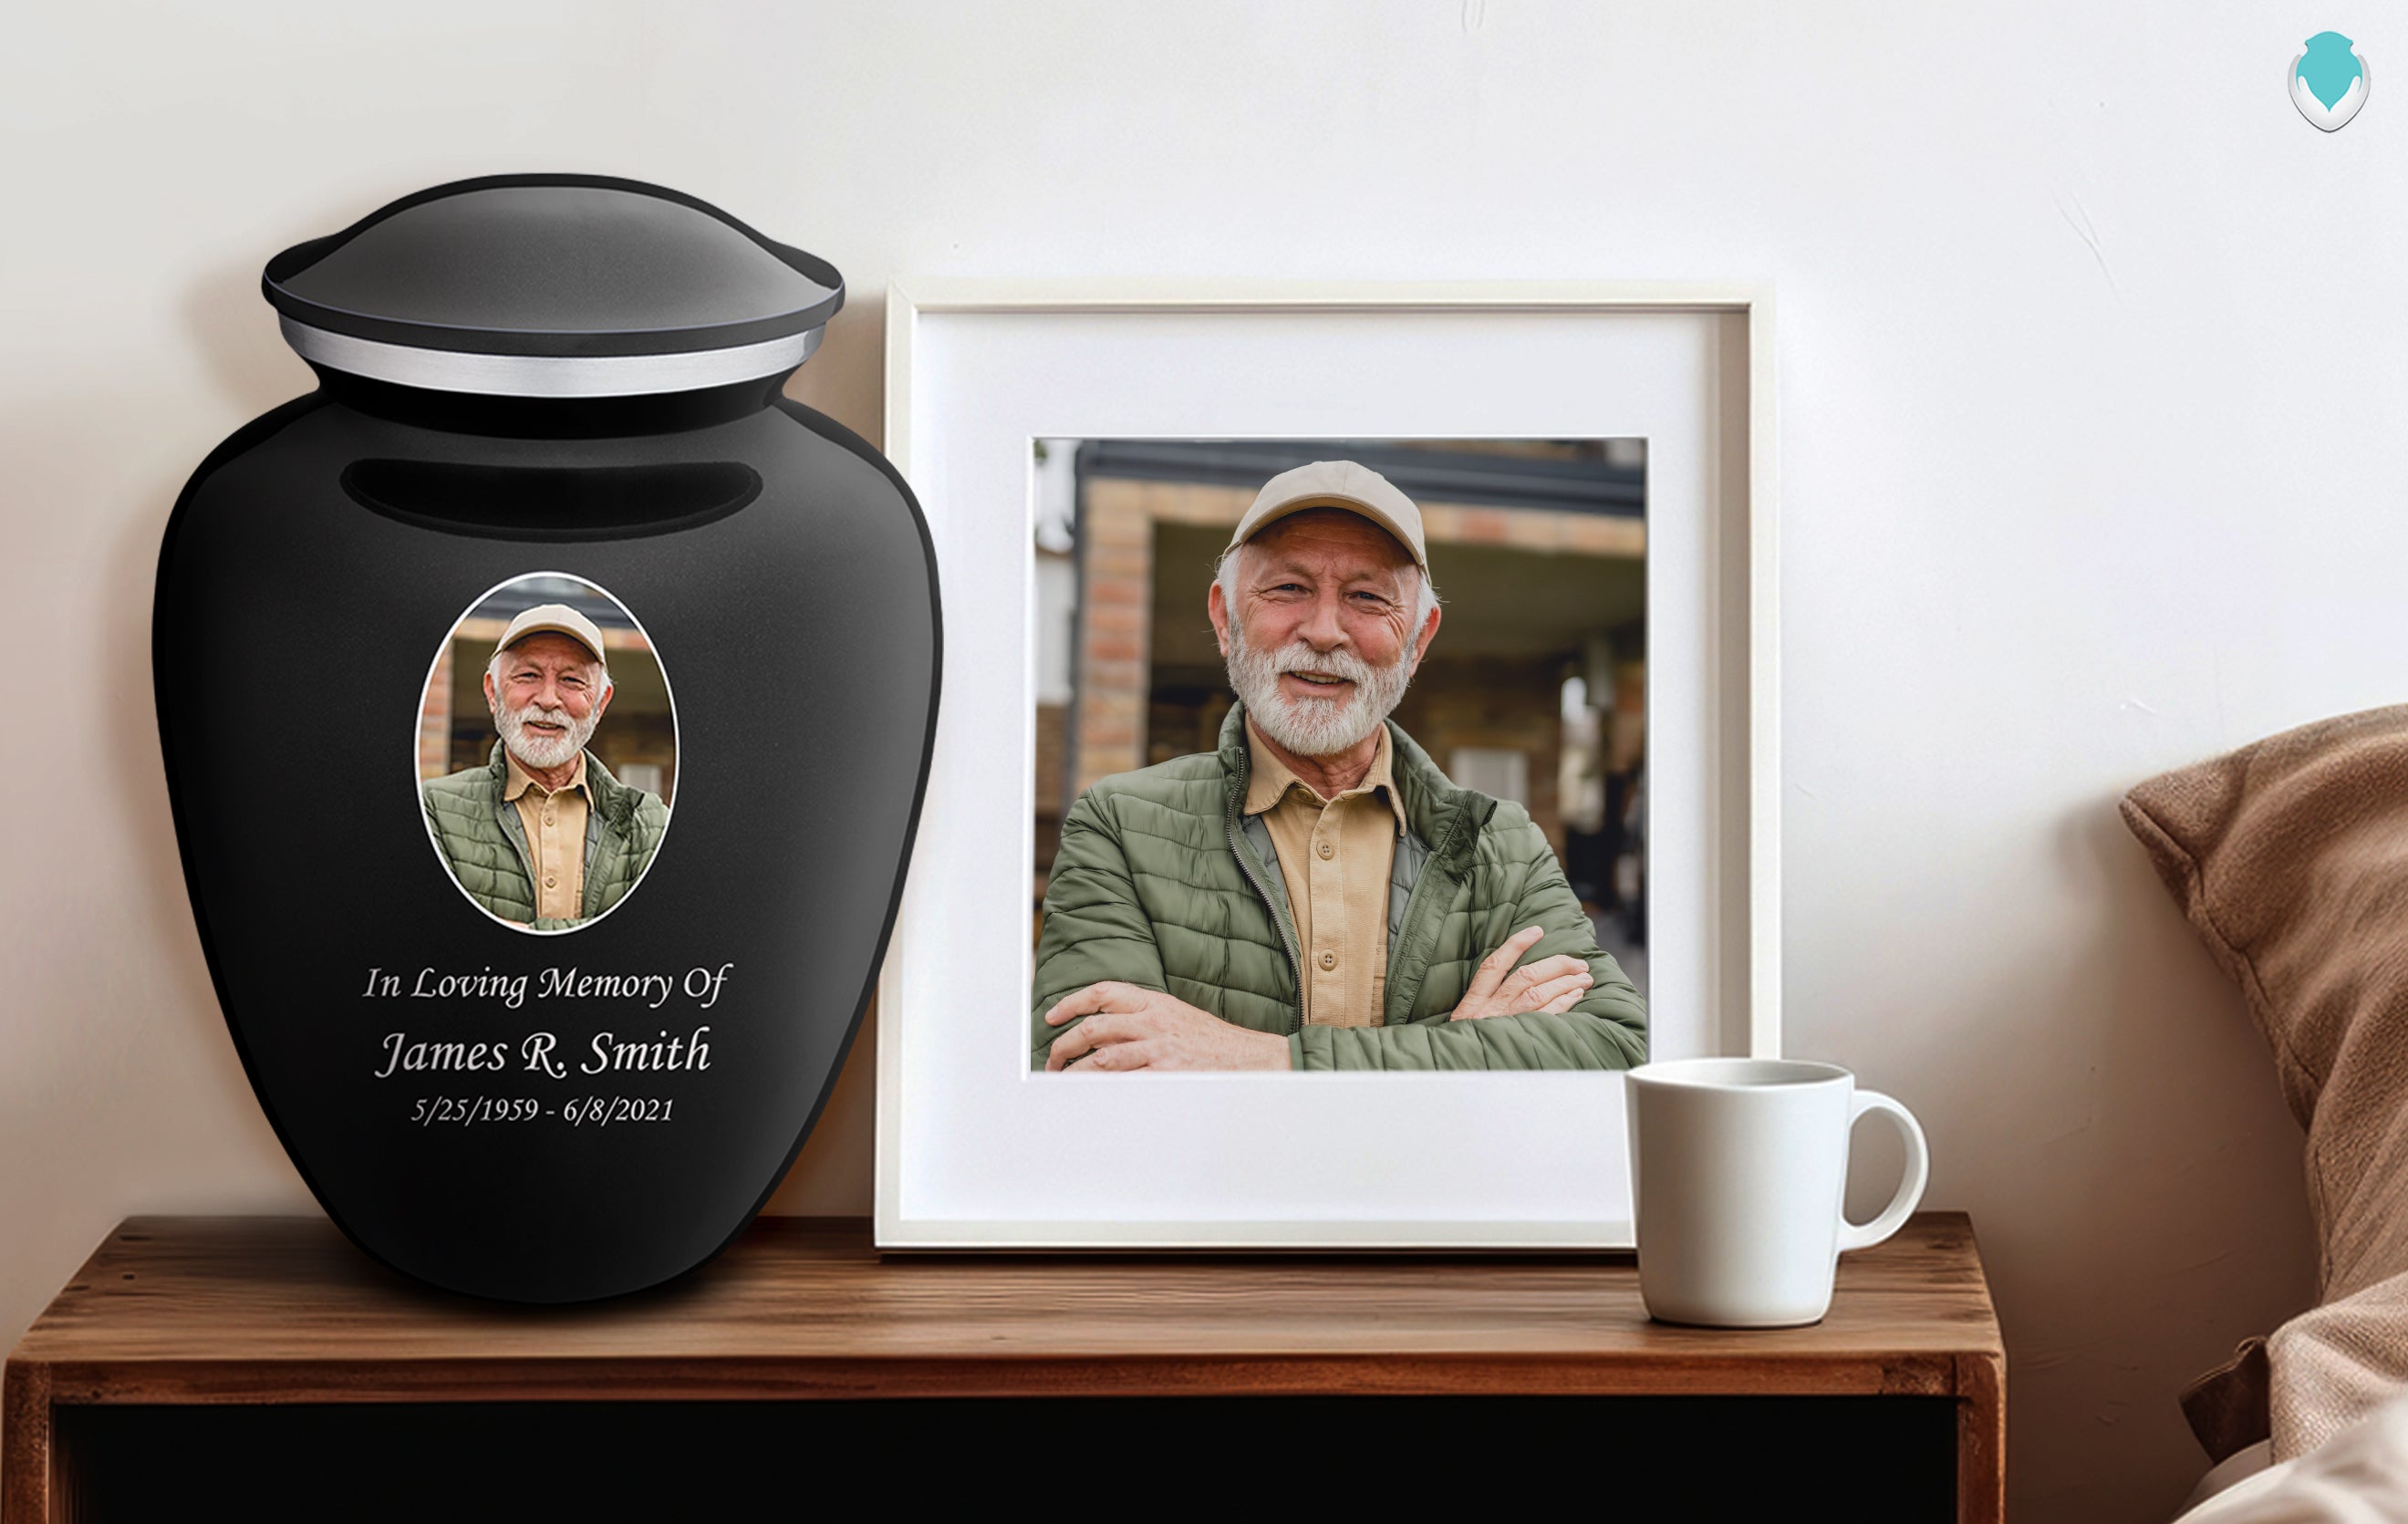 An elderly man's photo printed on a photo urn of black color